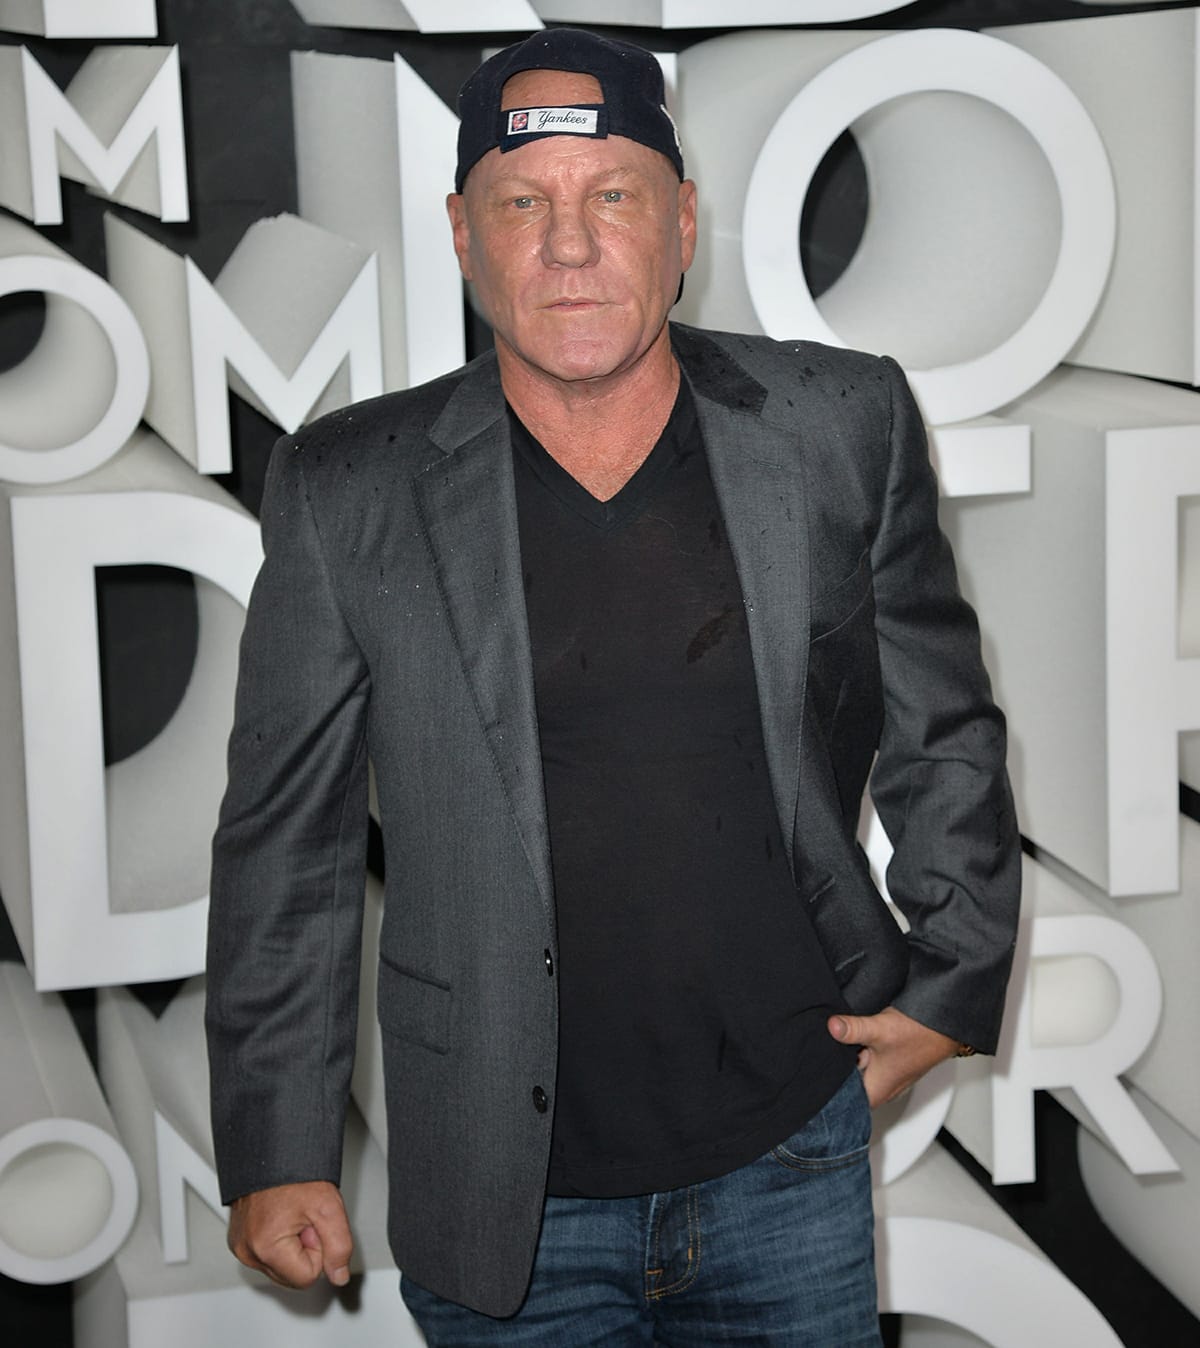 Steve Madden started his eponymous brand with $1,100 in 1990 by selling shoes out of the trunk of his car to small Manhattan stores